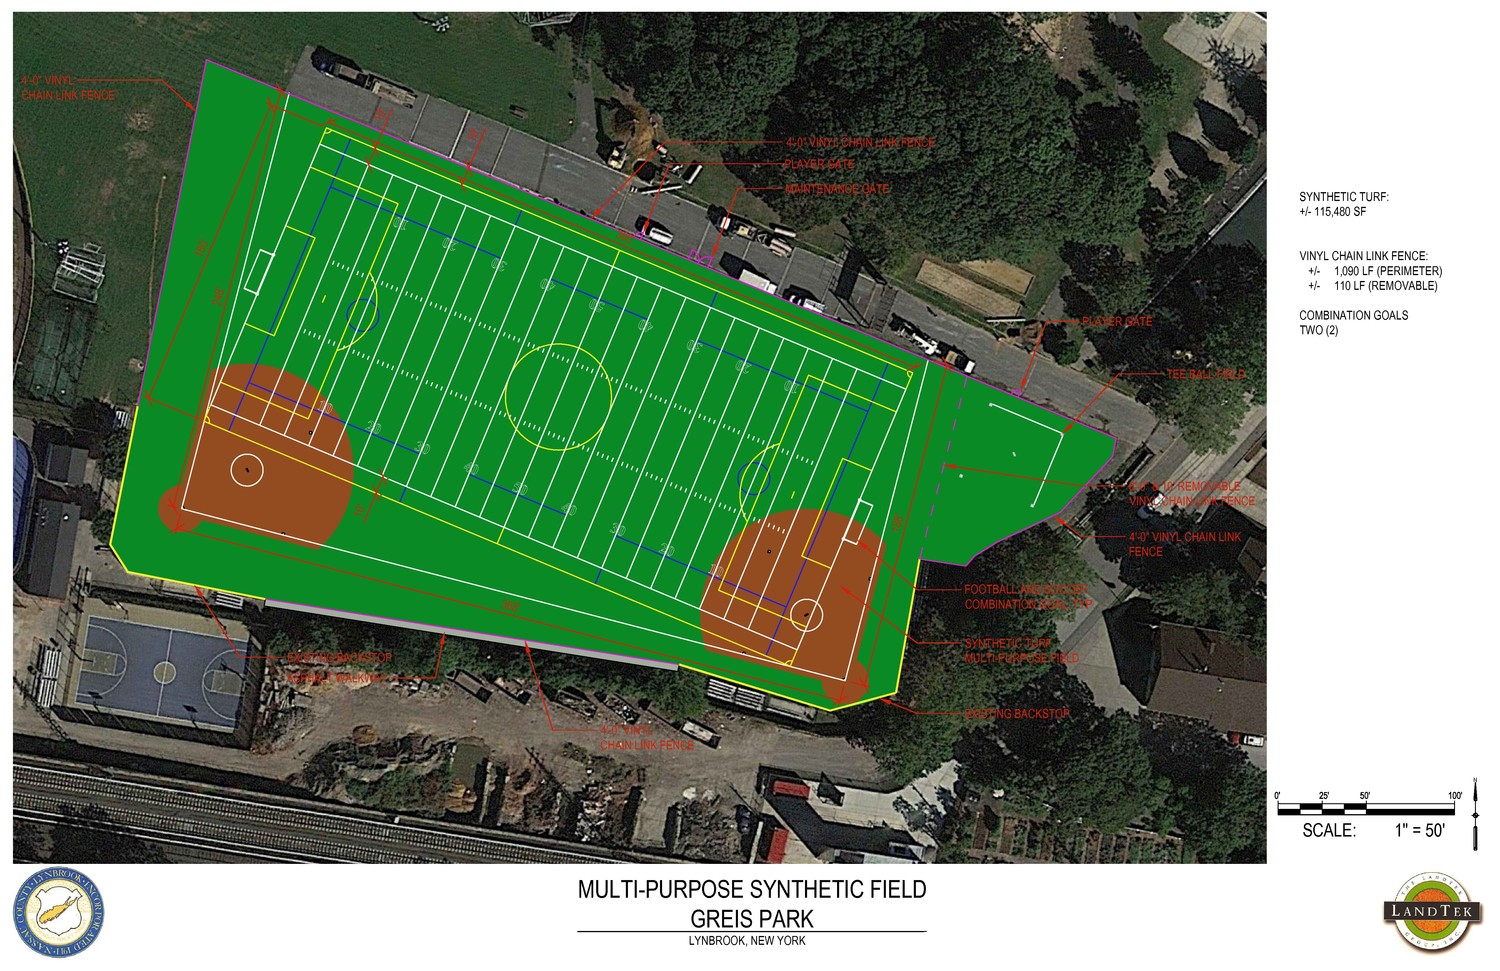 Representatives of The LandTek Group, based in Amityville, proposed building a $1.4 million turf field at Greis Park to the Lynbrook village board on March 5. Village officials have expressed interest, but are still thinking it over.